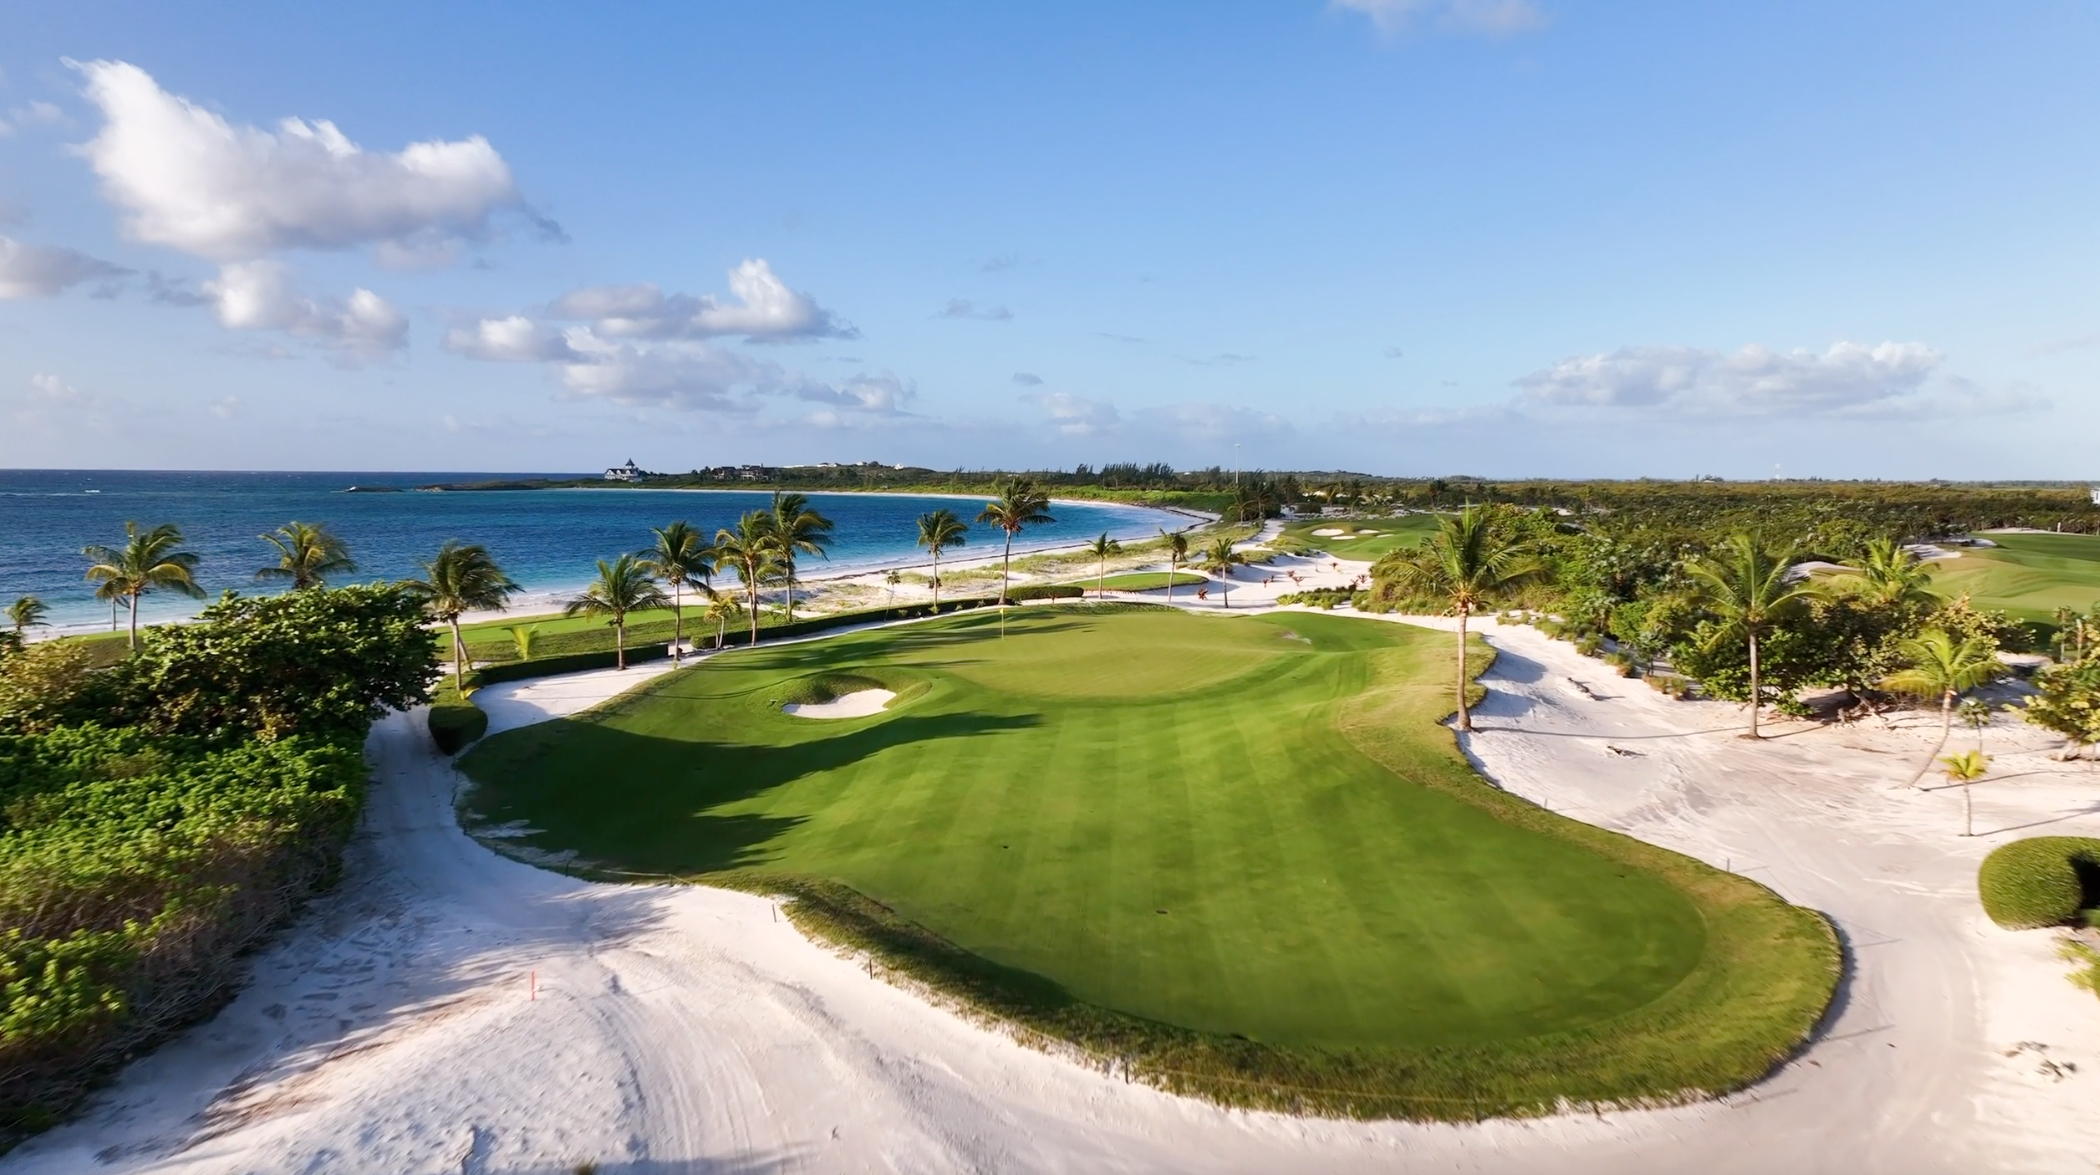 Aerial shot of Hole 4 from The Abaco Club golf course